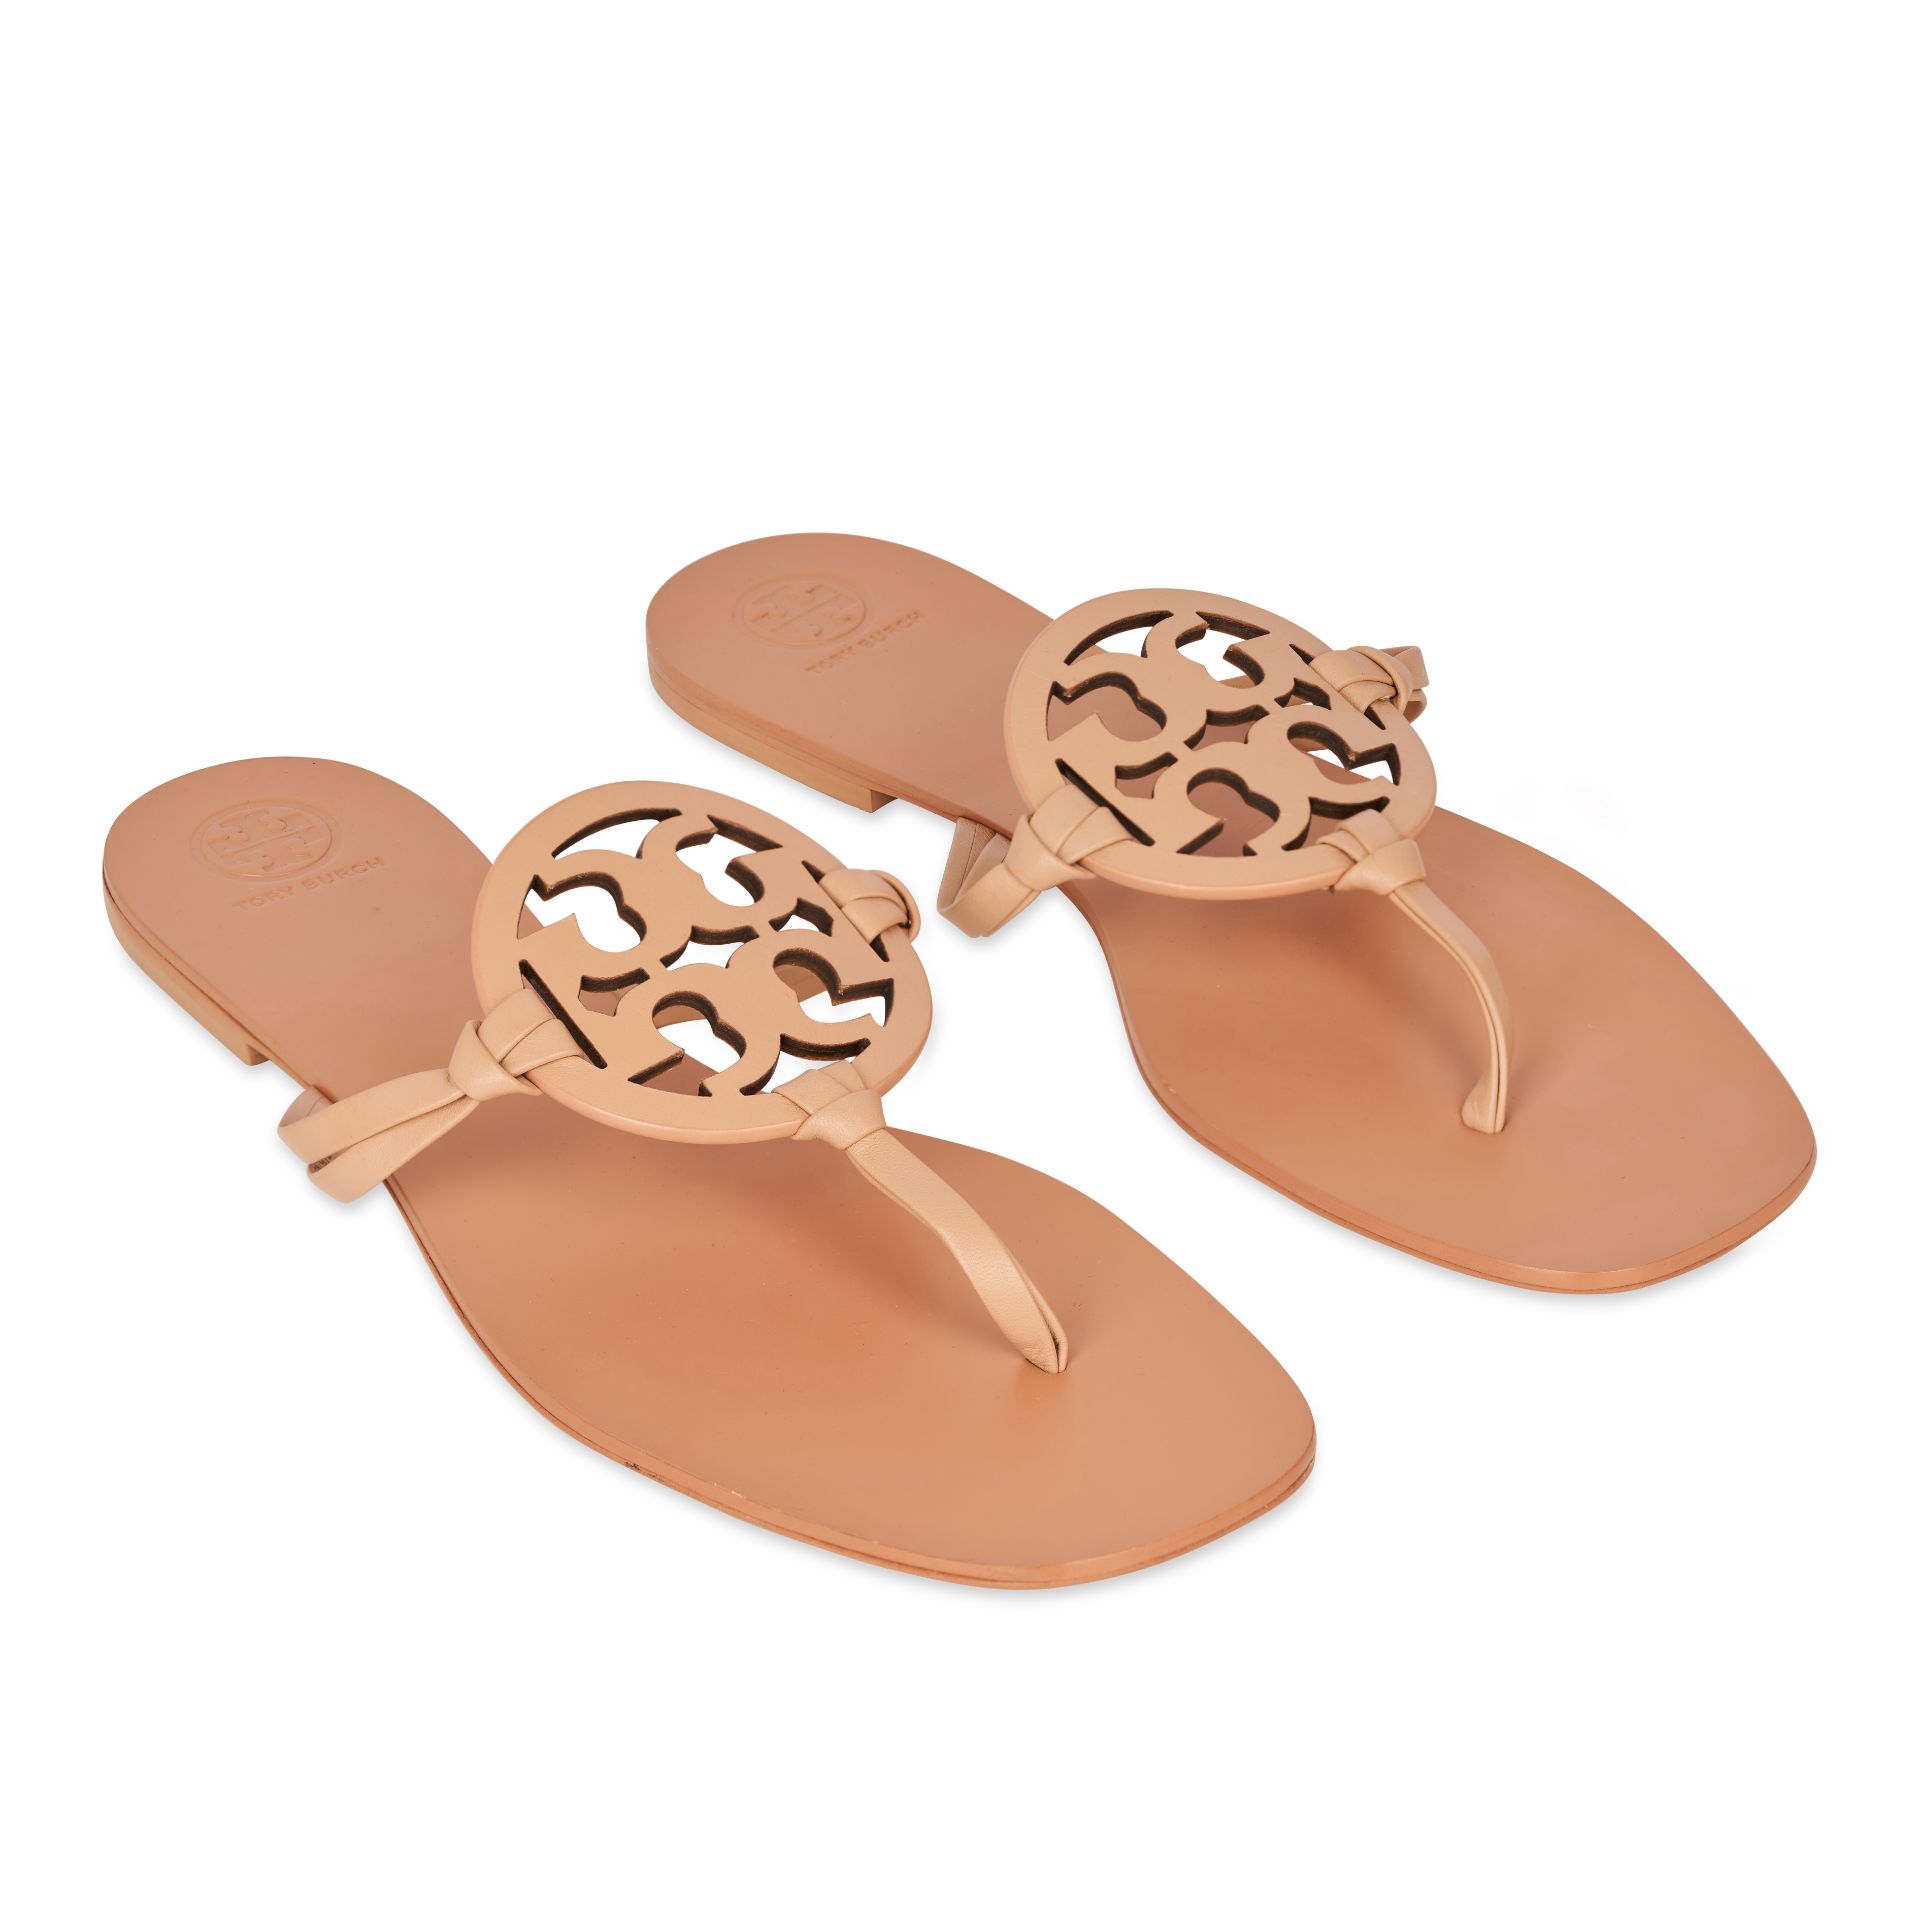 TORY BURCH BEIGE LOGO SANDALS Condition grade A. Size US 9.5. Beige toned leather with logo cut...